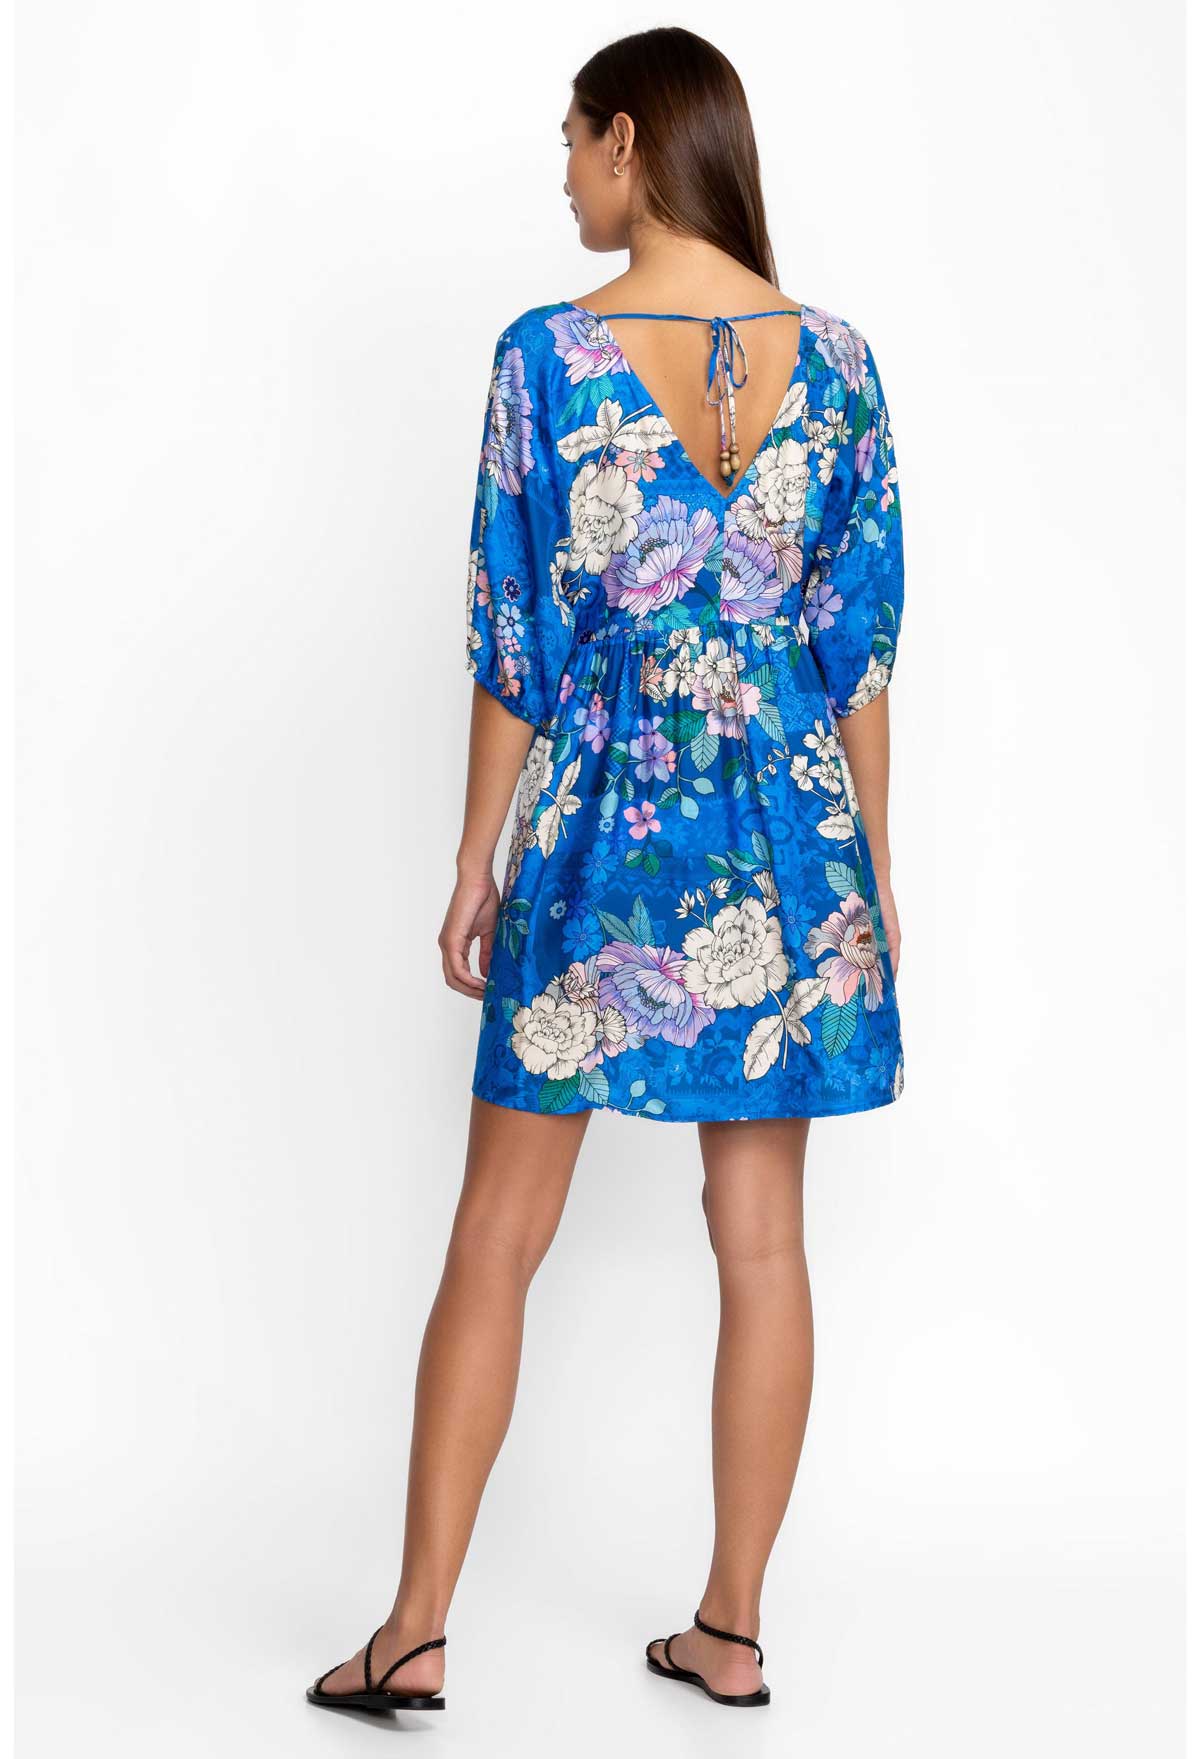 Blue dress Vasilina with embroidery, X-shaped silhouette, zipper on the  back, pockets in the side seams.